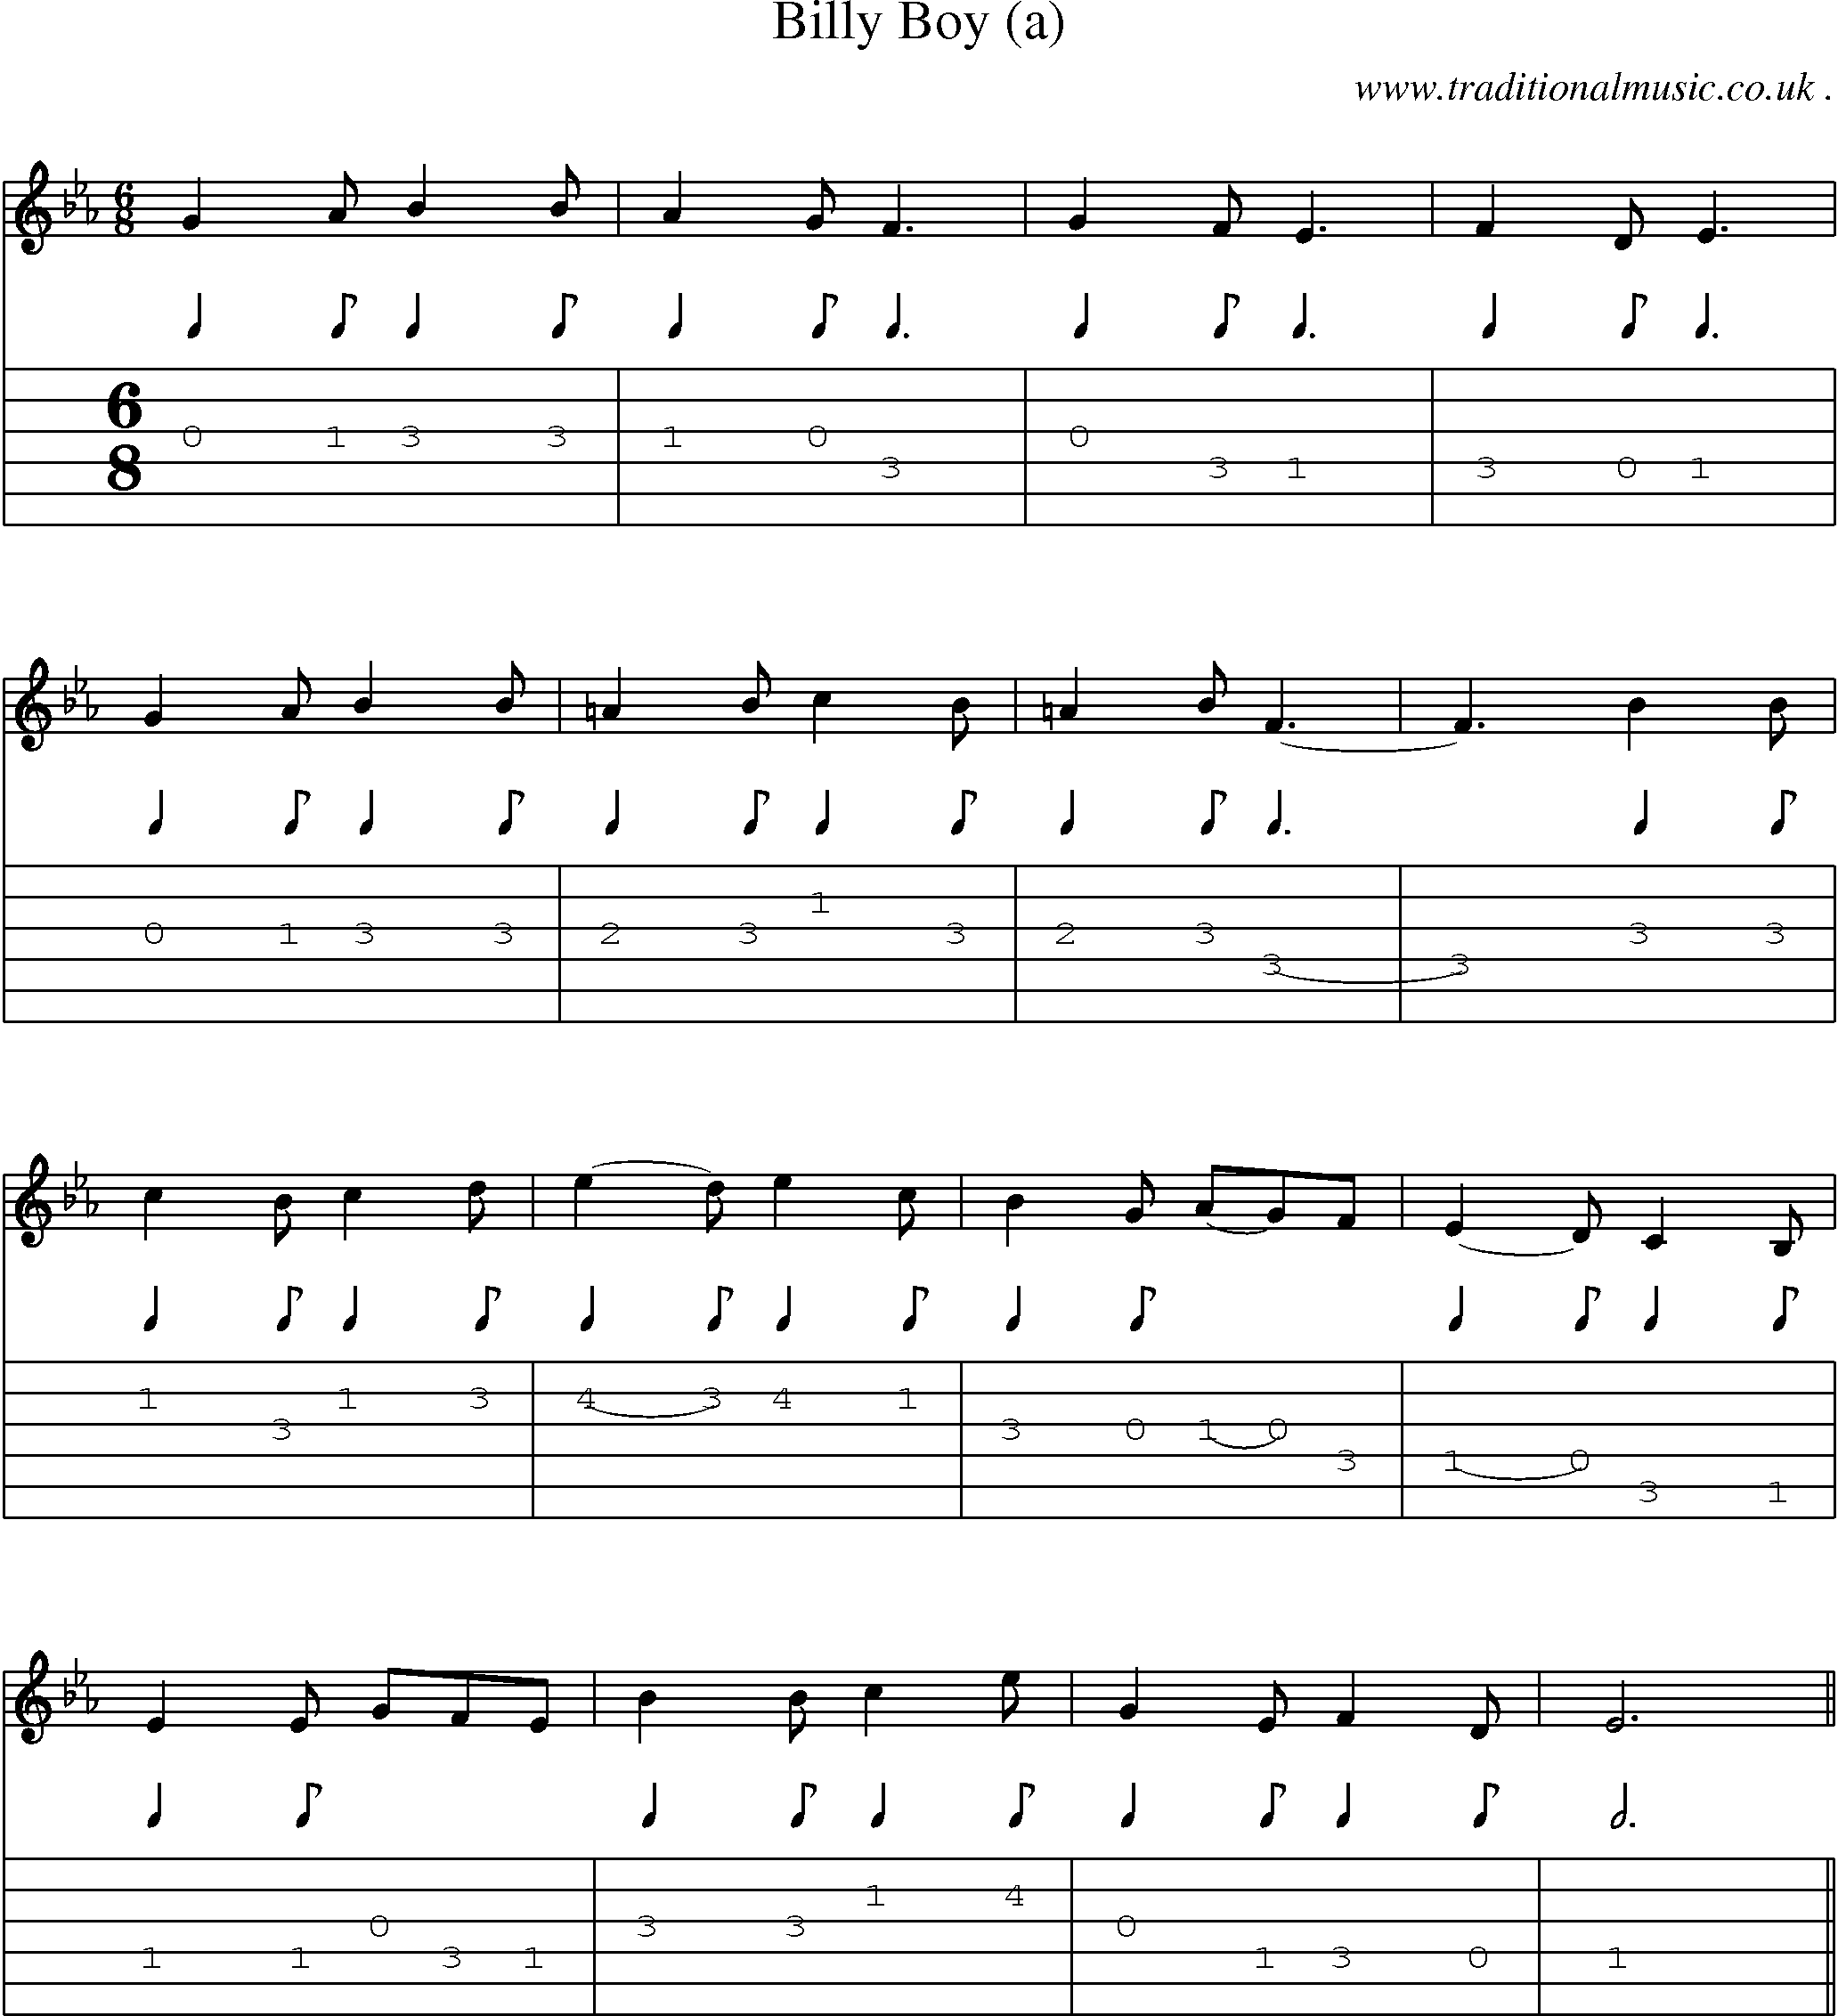 Sheet-Music and Guitar Tabs for Billy Boy (a)